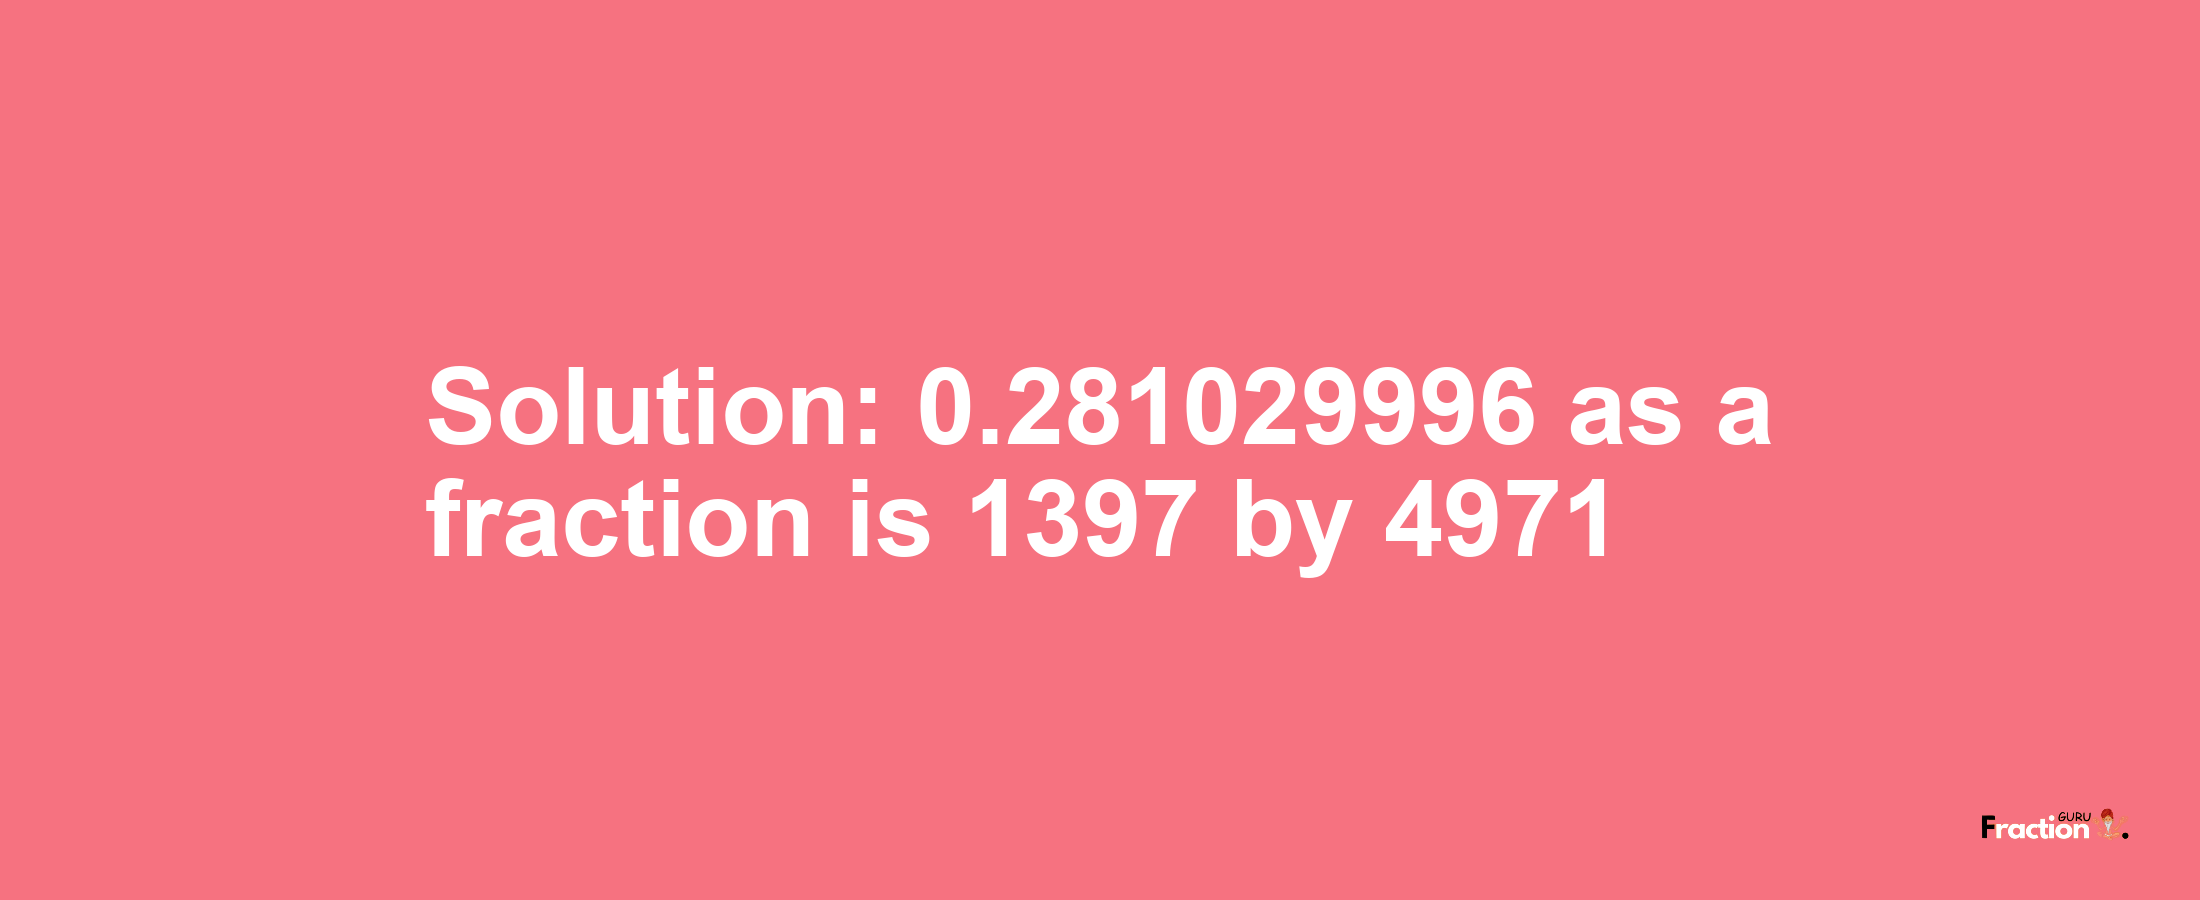 Solution:0.281029996 as a fraction is 1397/4971